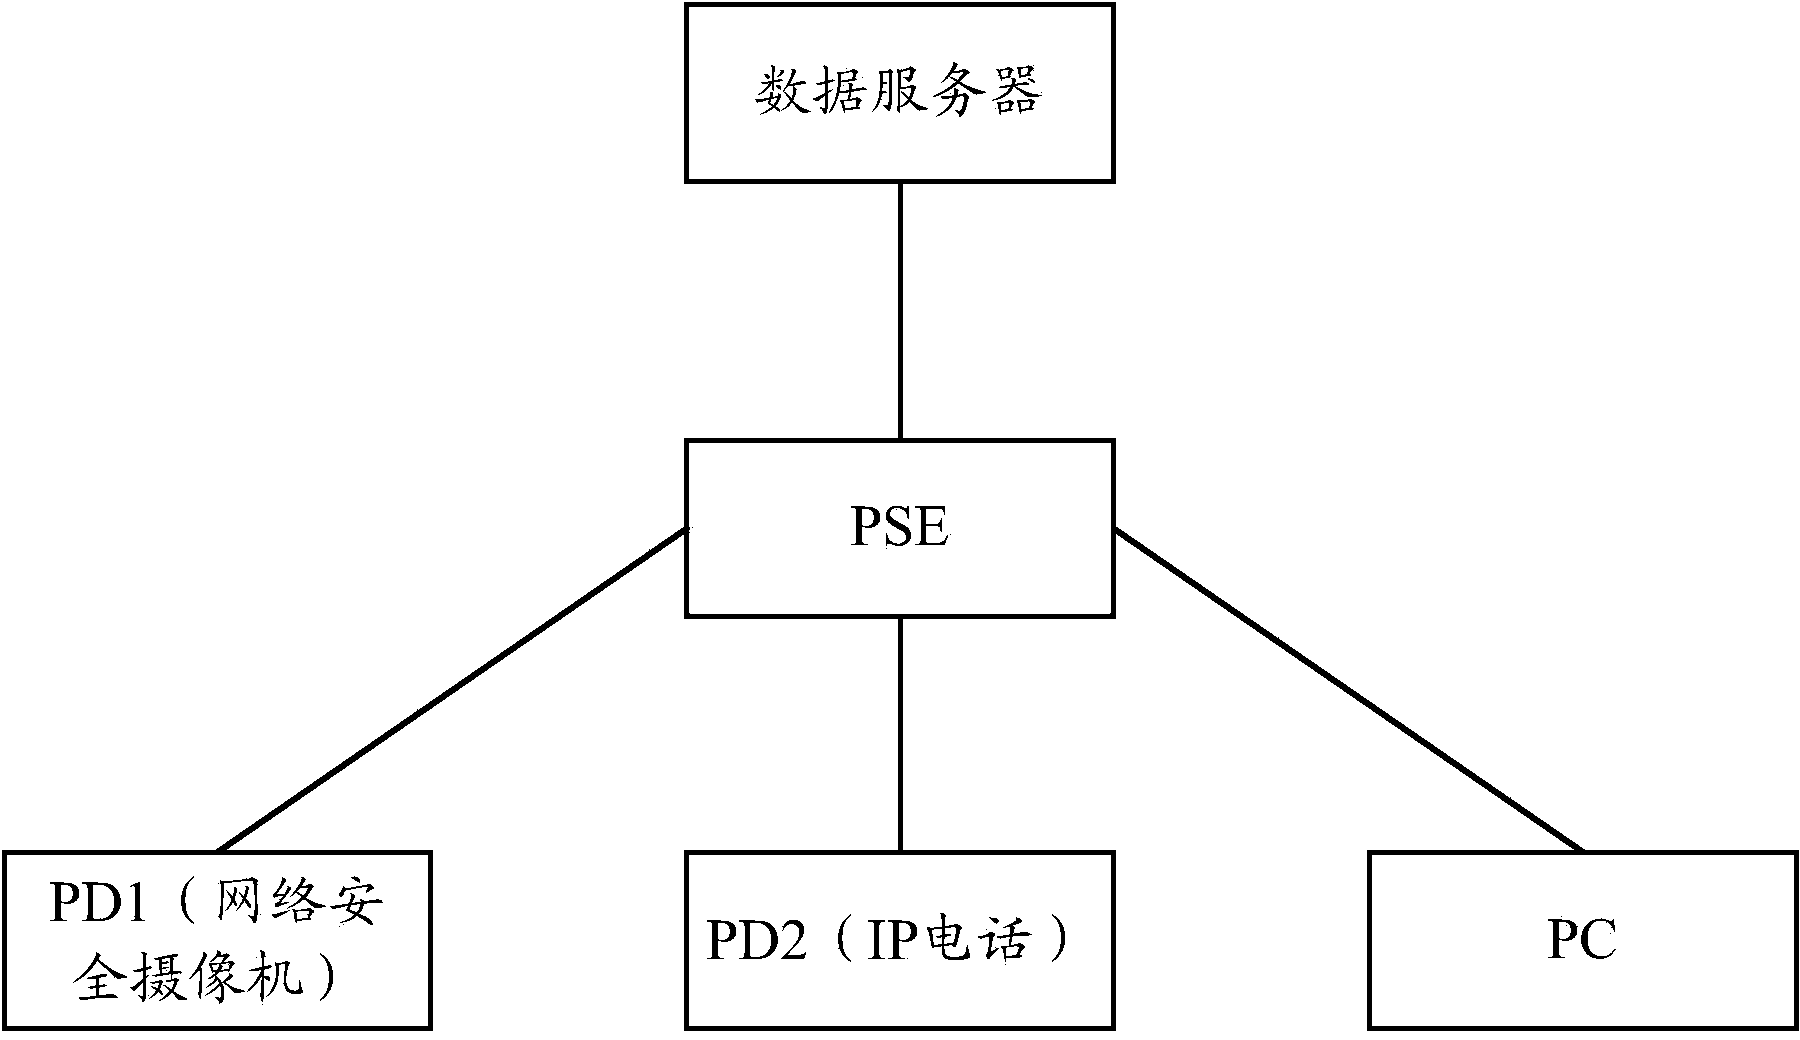 Port protection method of PSE and PSE